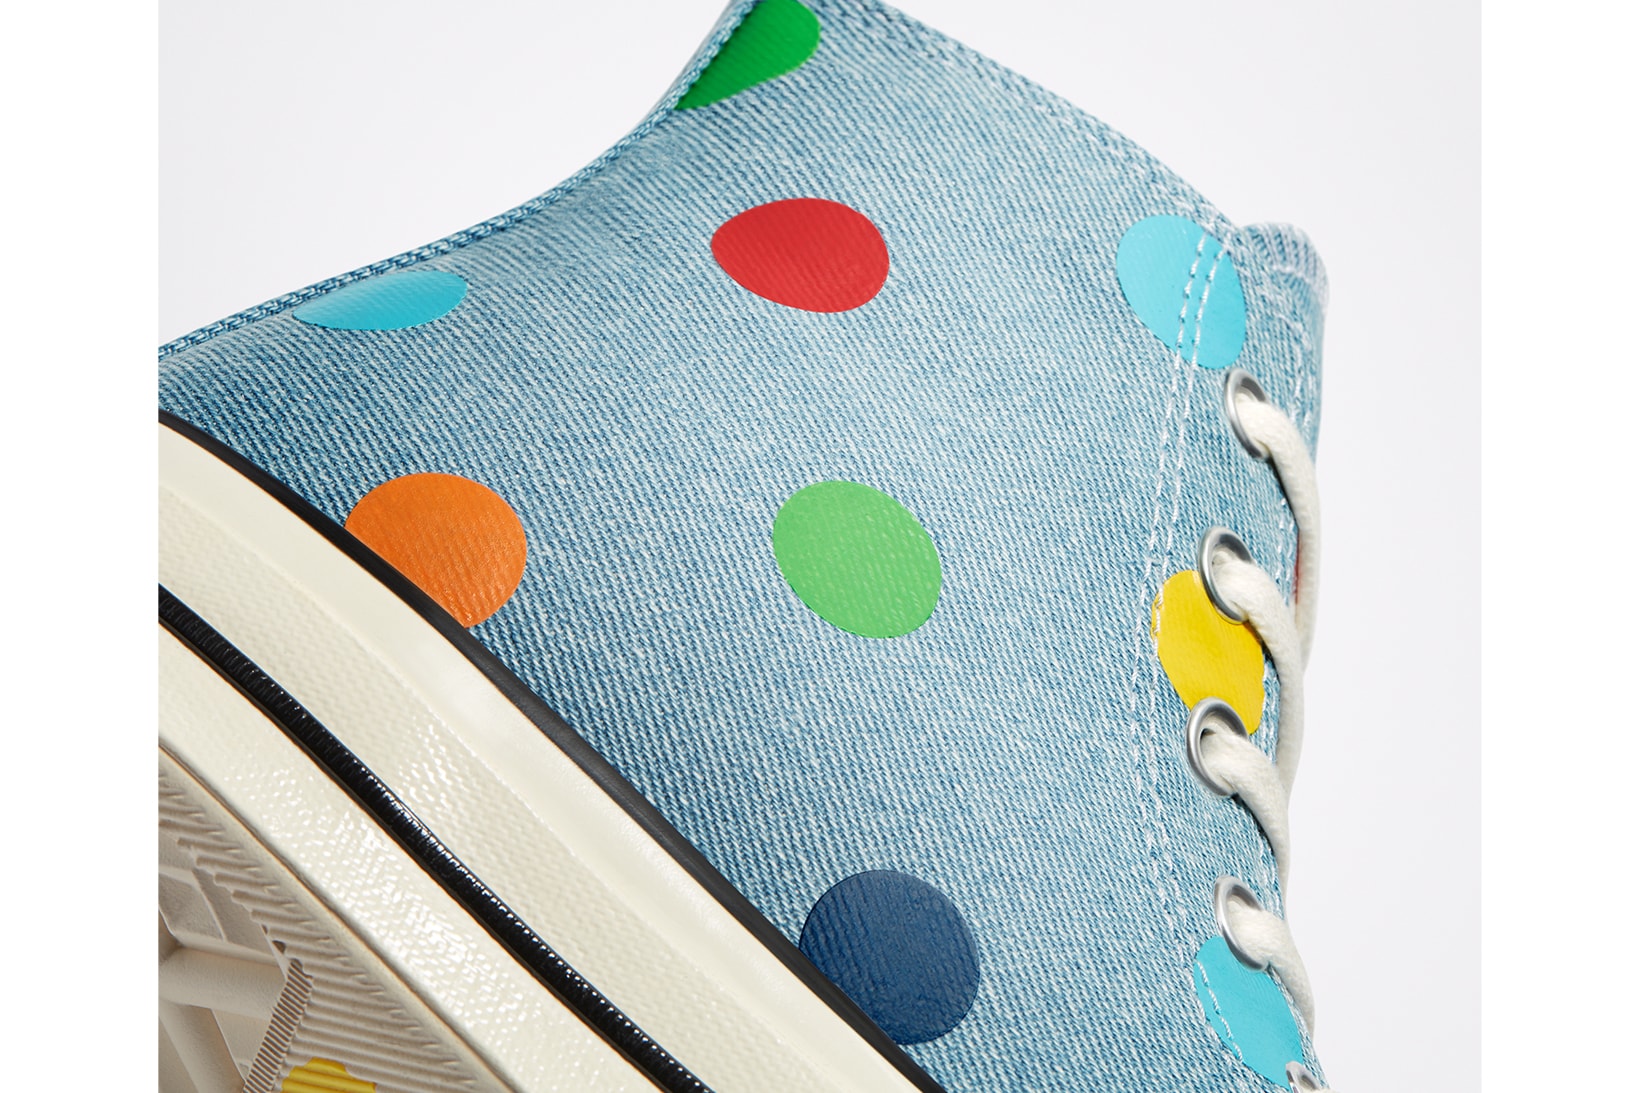 golf wang tyler the creator converse collaboration chuck 70 sneaker light blue polka dots colorway green red yellow white sneakerhead footwear shoes